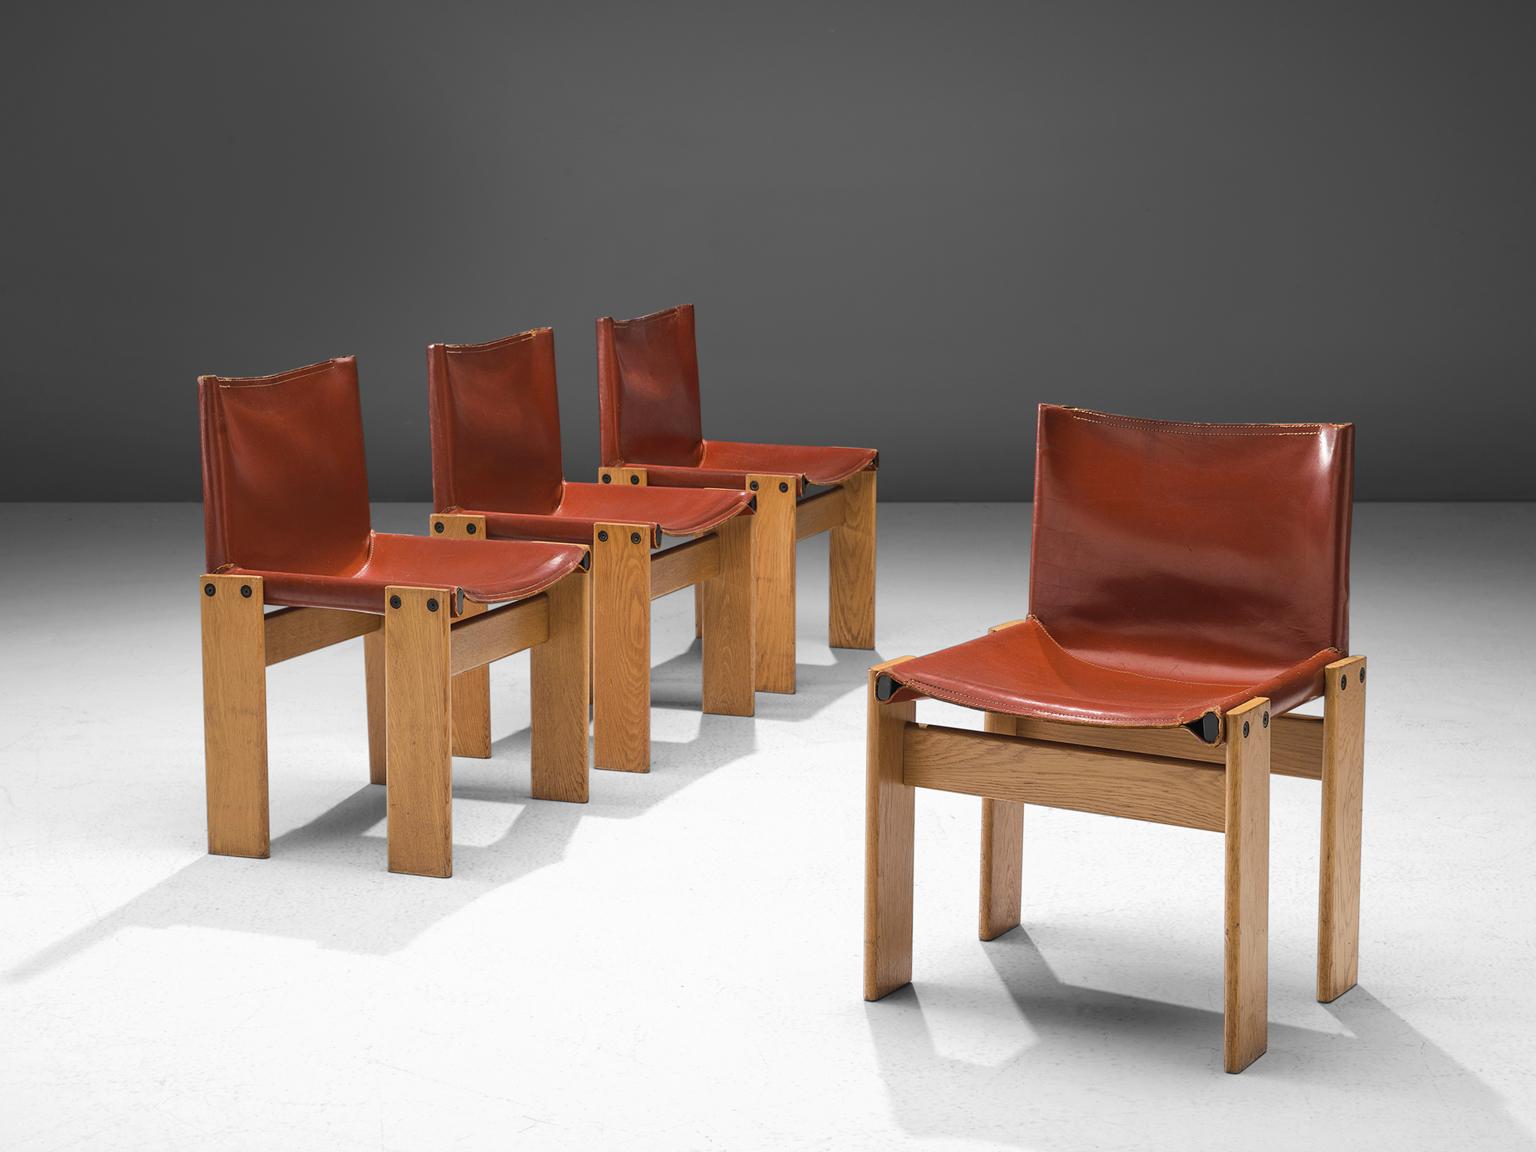 Afra & Tobia Scarpa, set of four 'Monk' dining chairs, patinated teak and red leather, Italy, 1974.

The wonderfully red leather forms a striking combination with the blond wood. Interesting is the 'flat' shape of this chair where the designer has